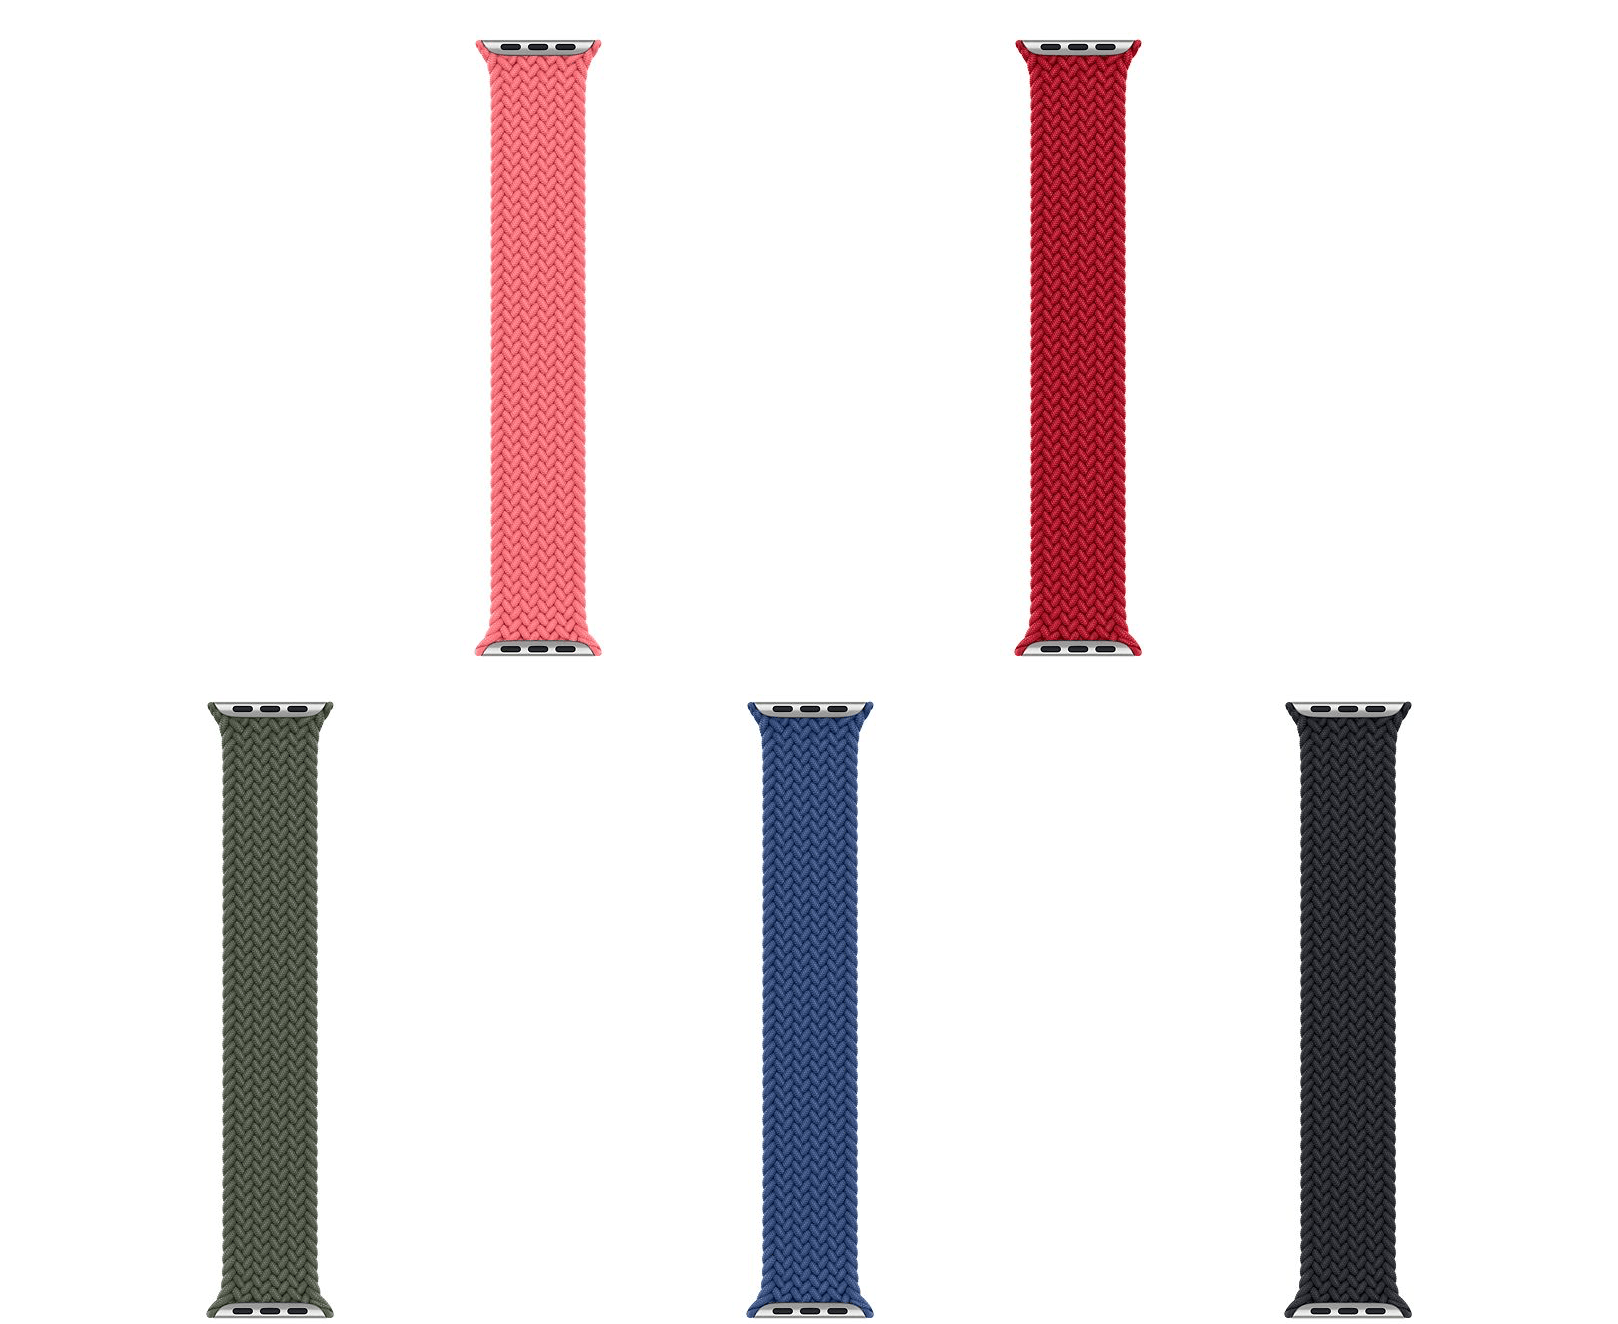 There are five colors of Braided Solo Loop bands.